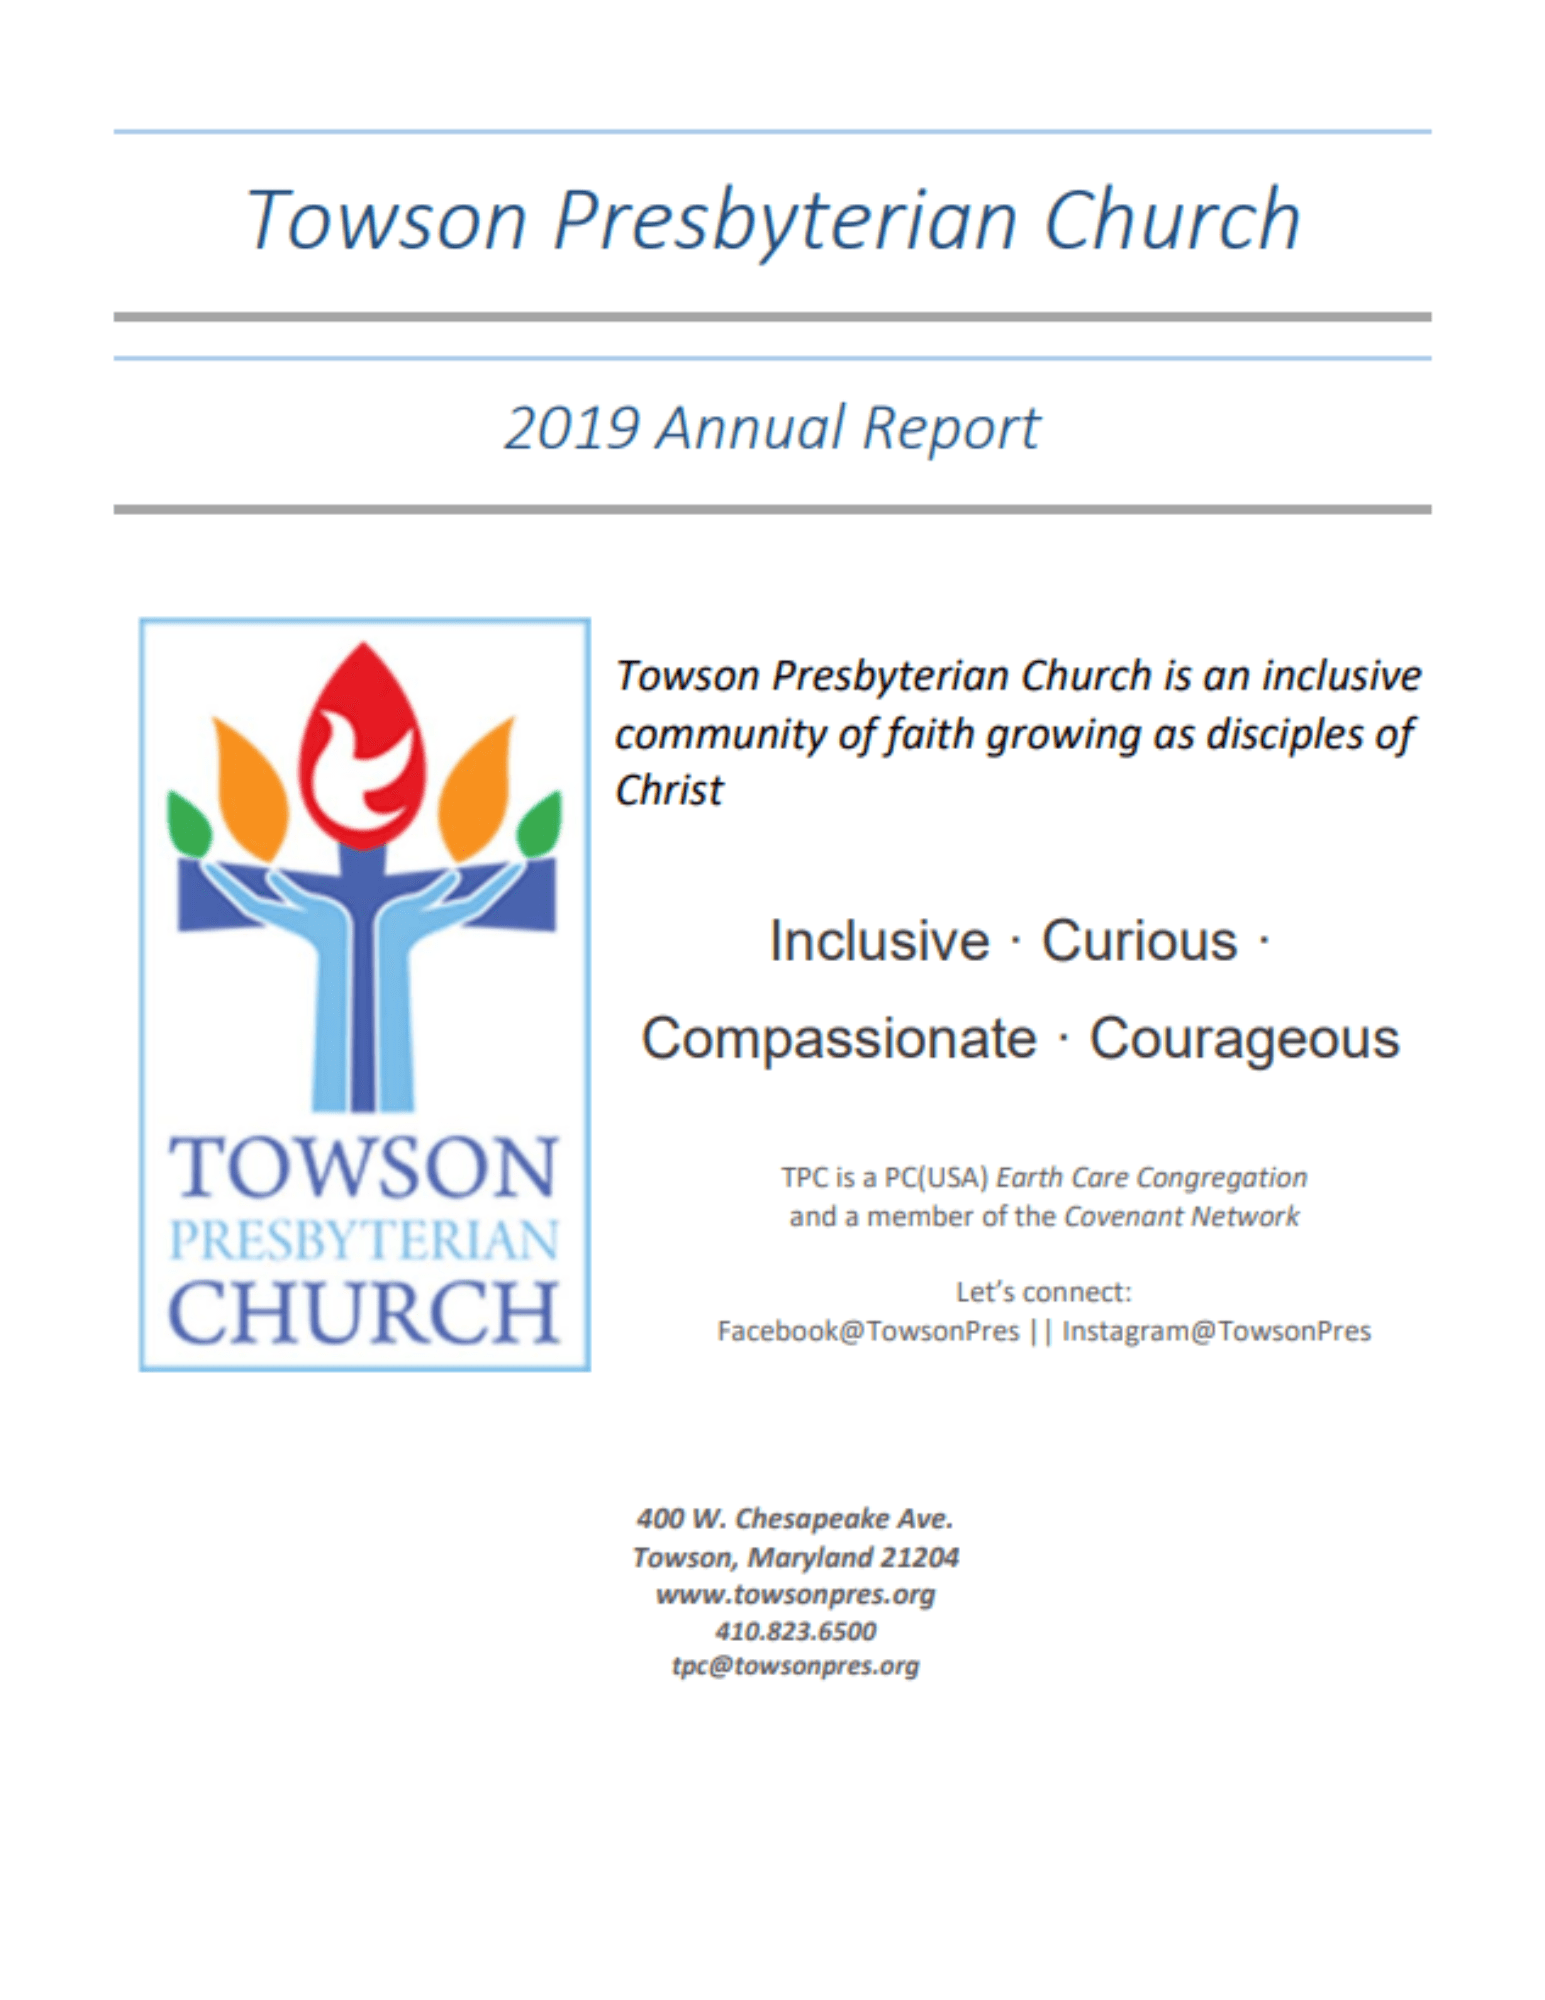 Infographic of the Towson Presbyterian Church 2019 Annual Report.